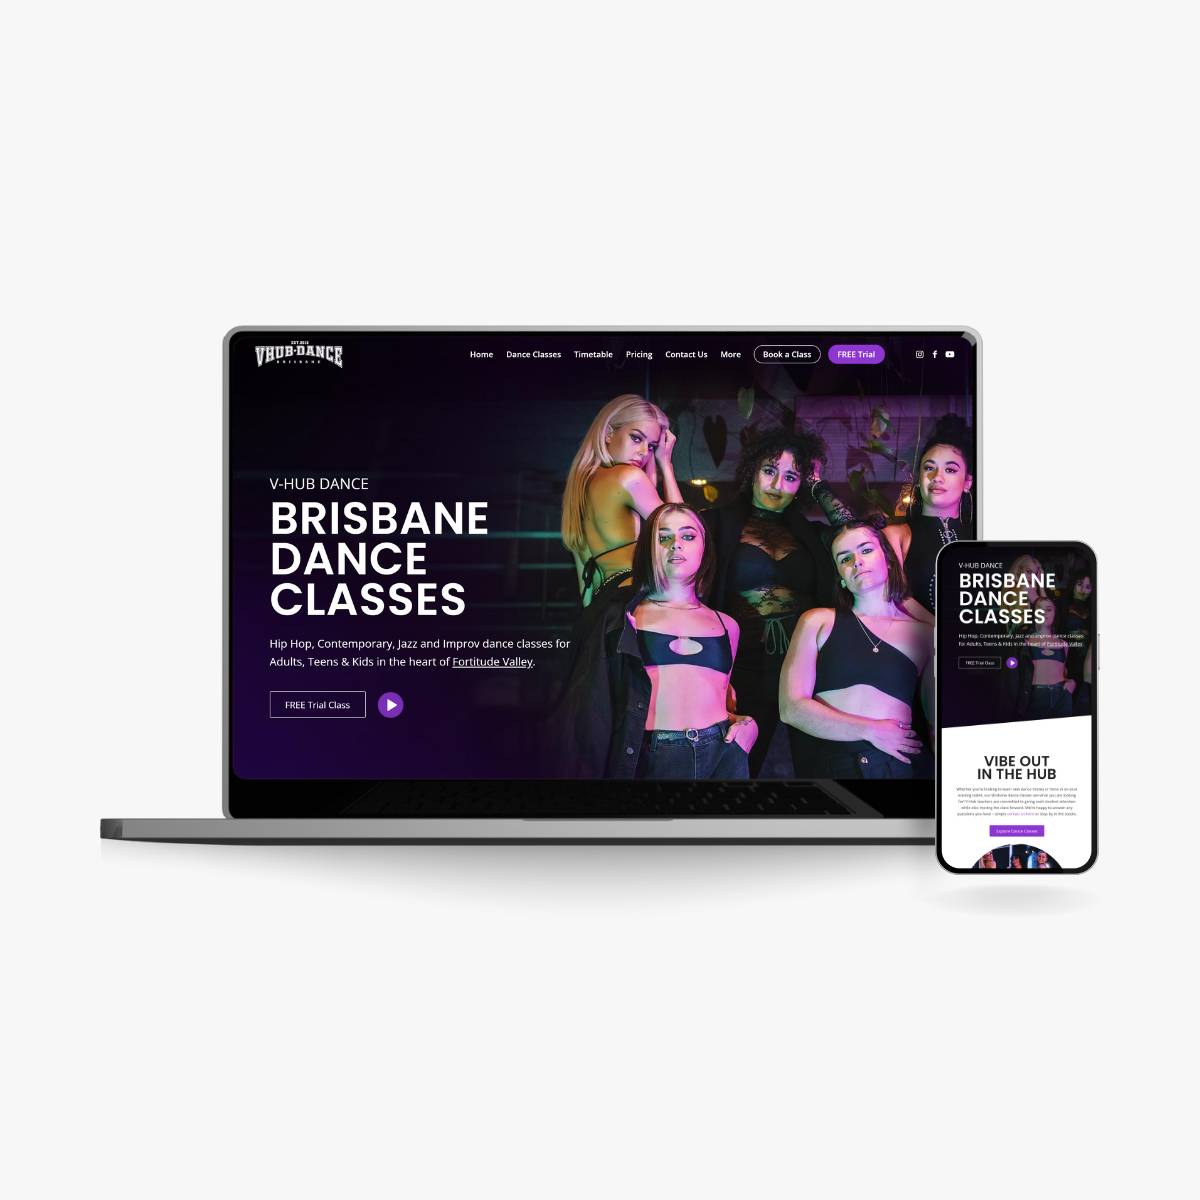 Best Website Designs for Dance and Fitness Studios - V-Hub Dance provides a great example for an effective online presence for a dance studio.